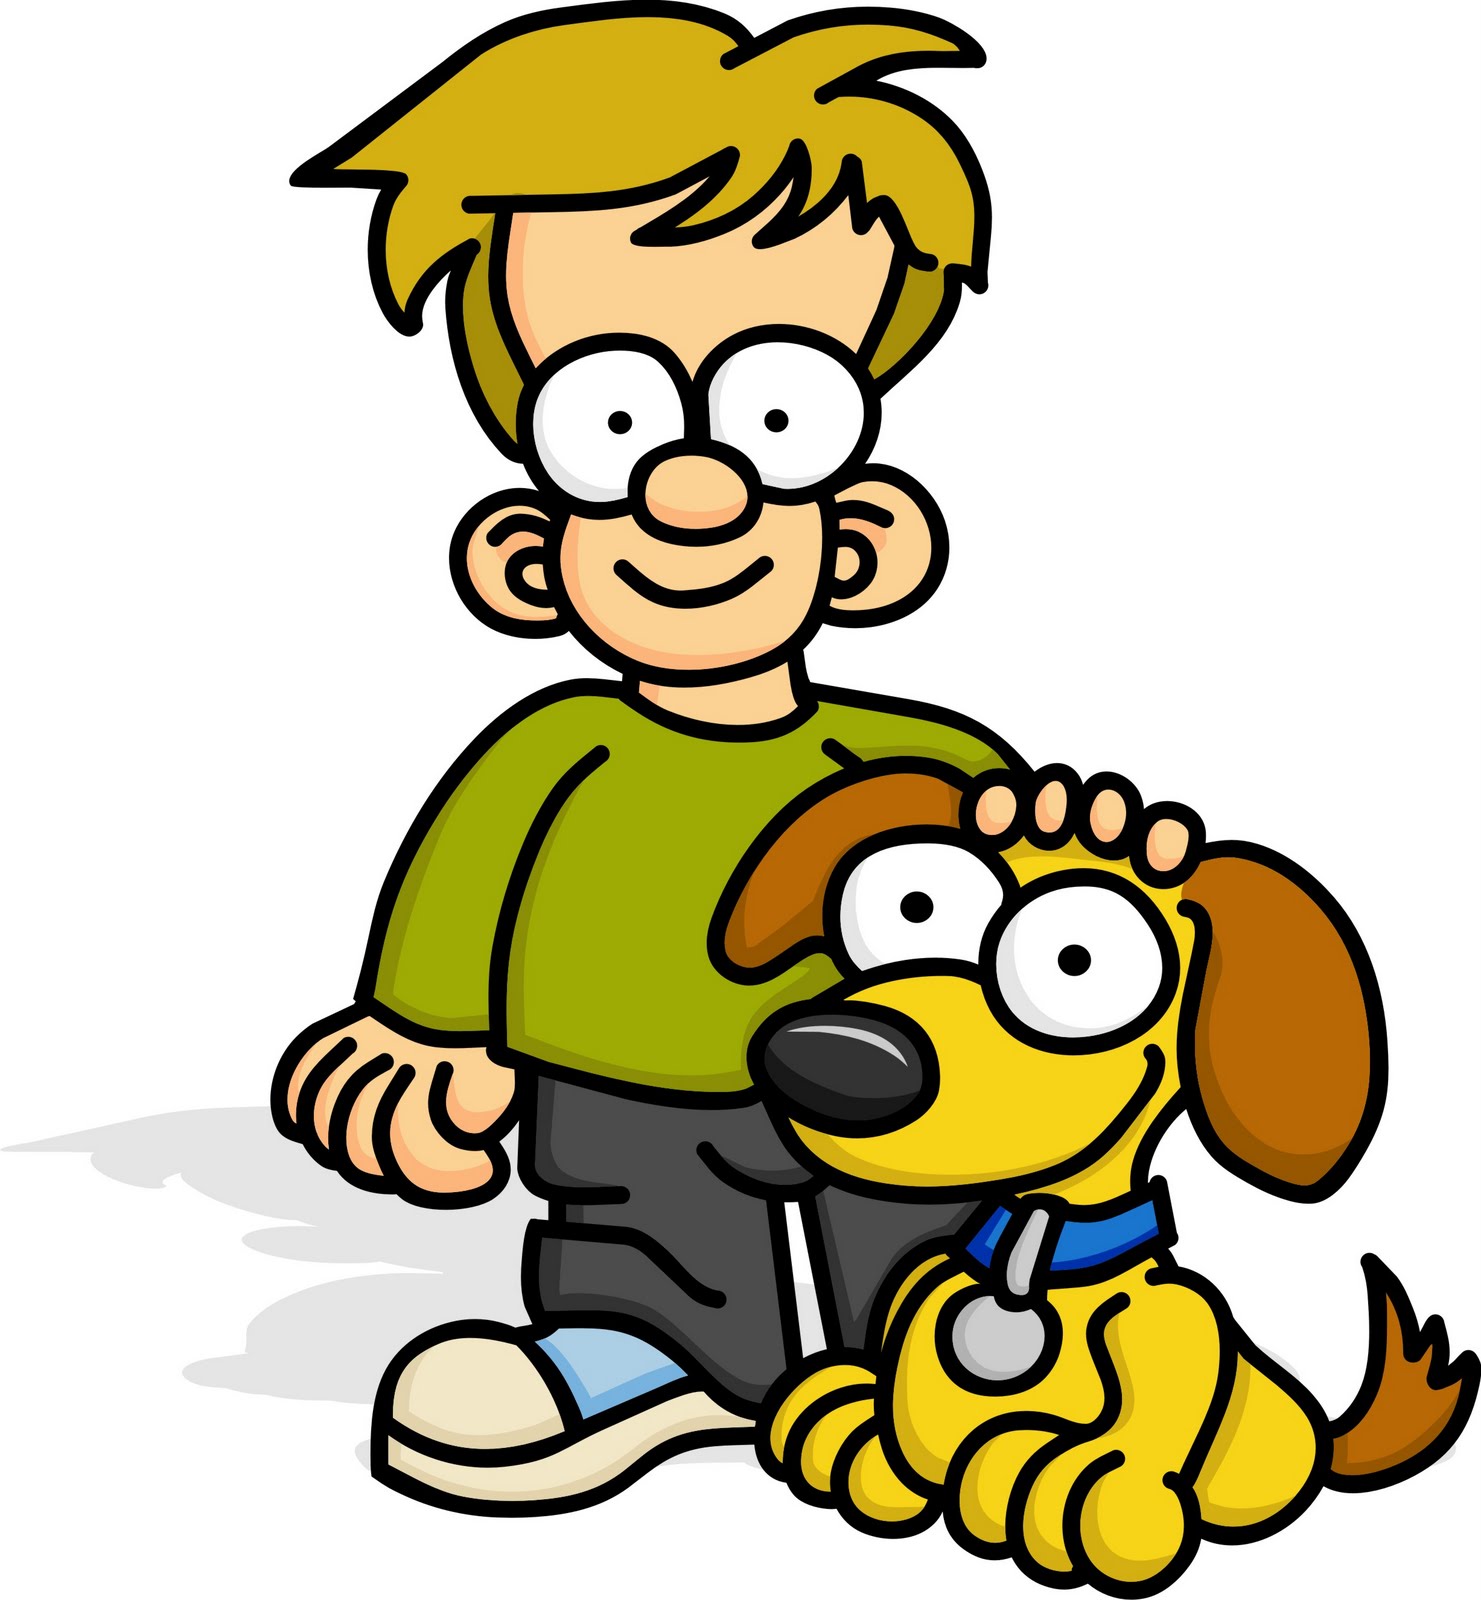 clipart dogs kid